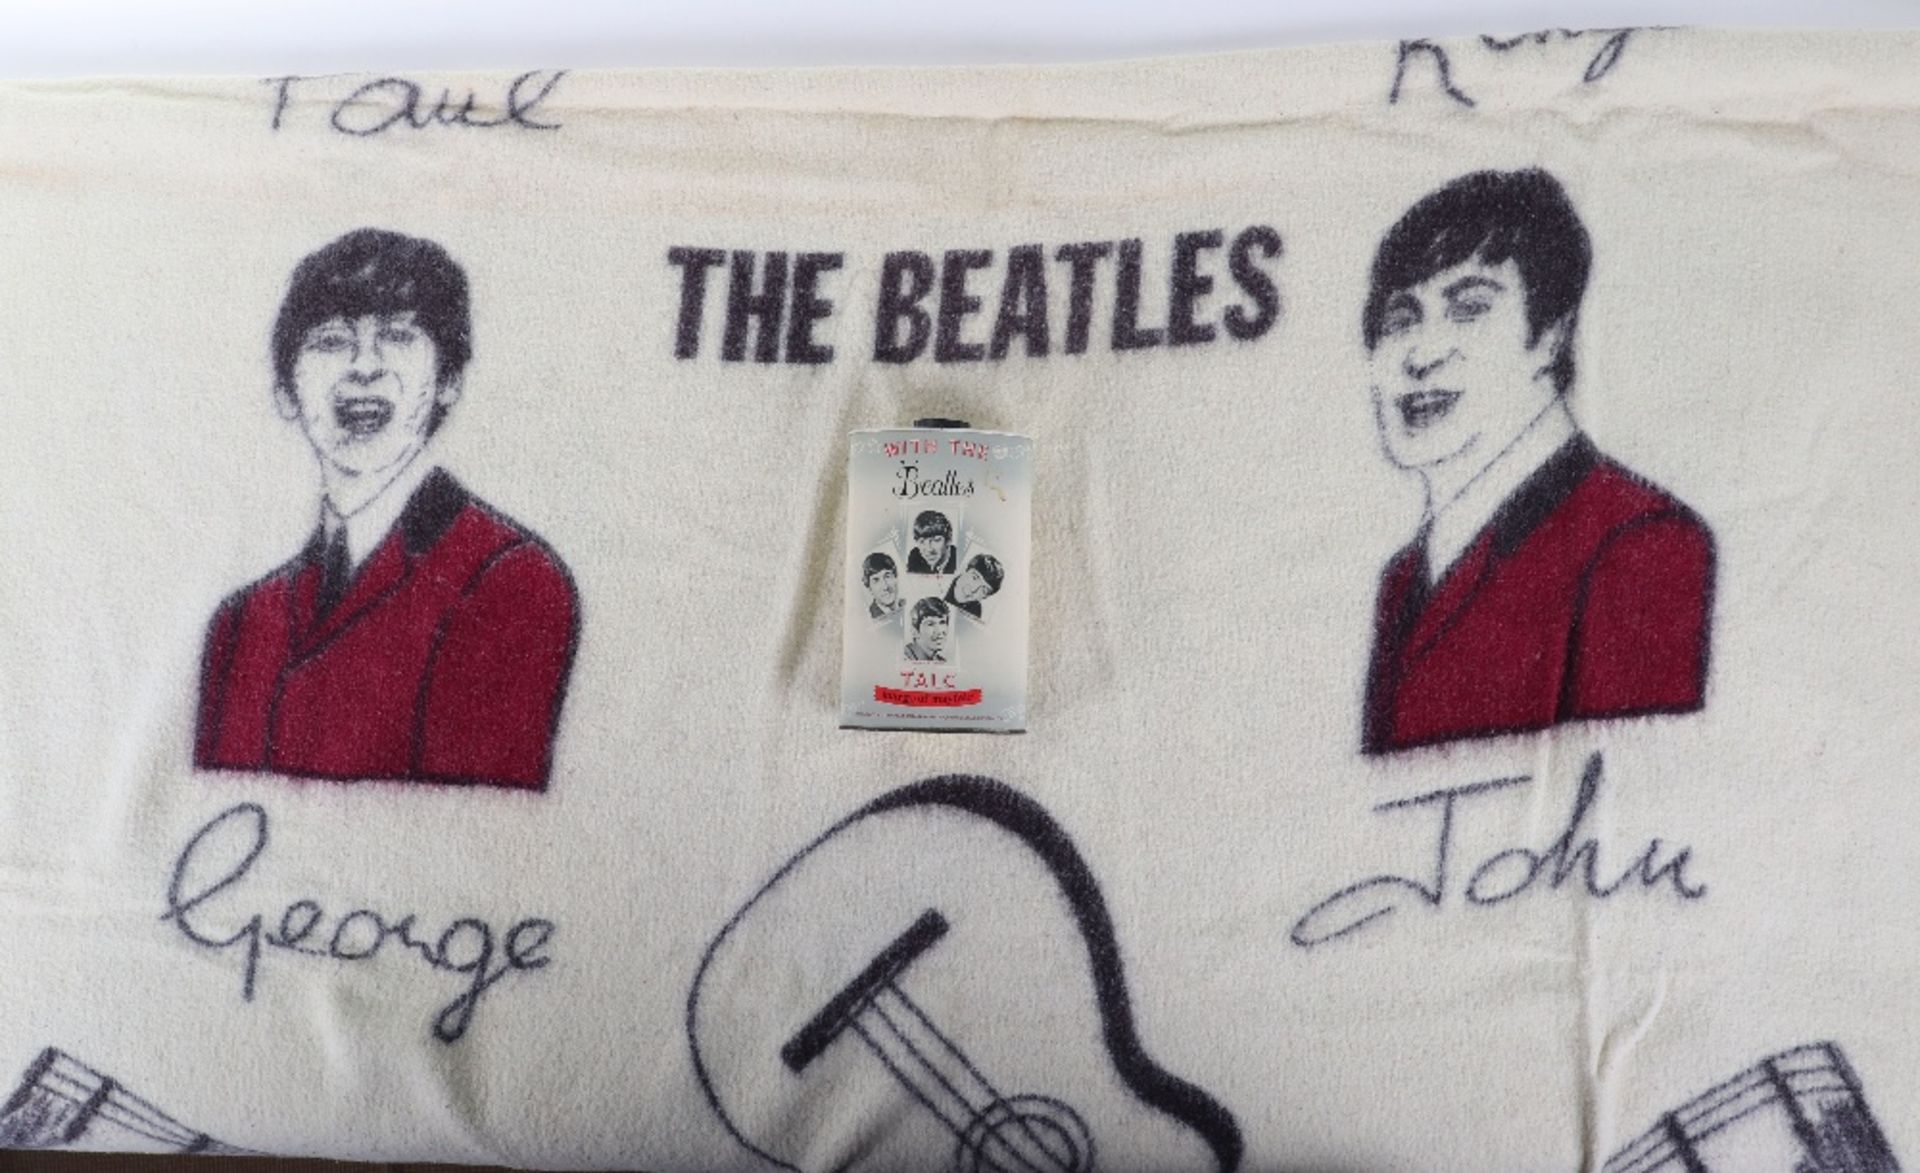 TALC Powder “with the Beatles” 1960s tin and blankets